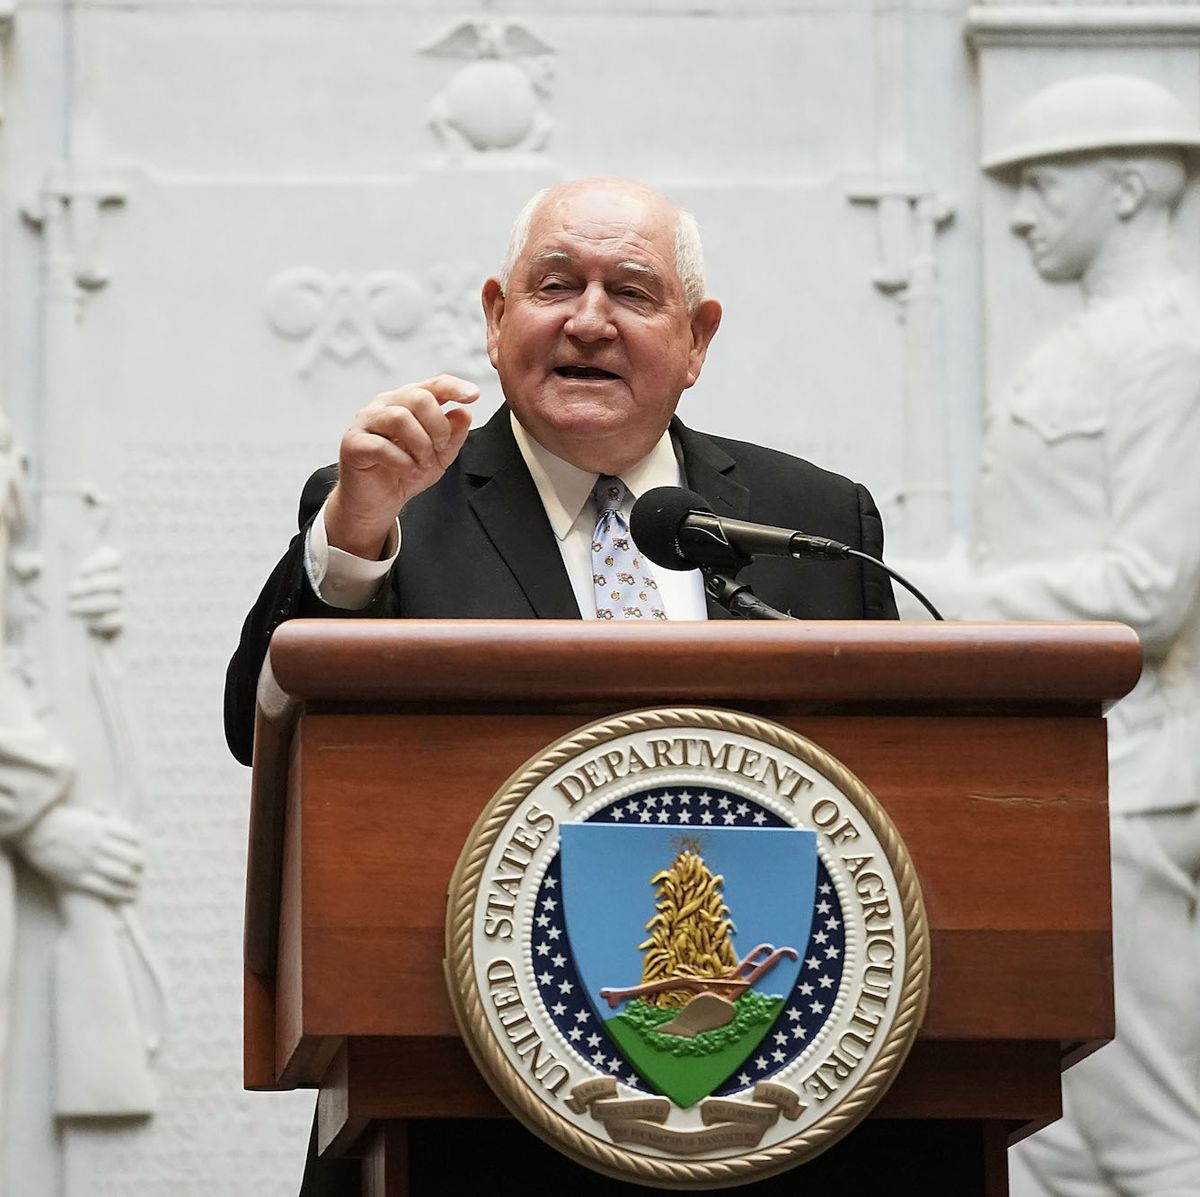 Agriculture Secretary Sonny Perdue And FCC Chairman Ajit Pai Speak At Forum On Increasing Internet Connectivity In Rural Areas